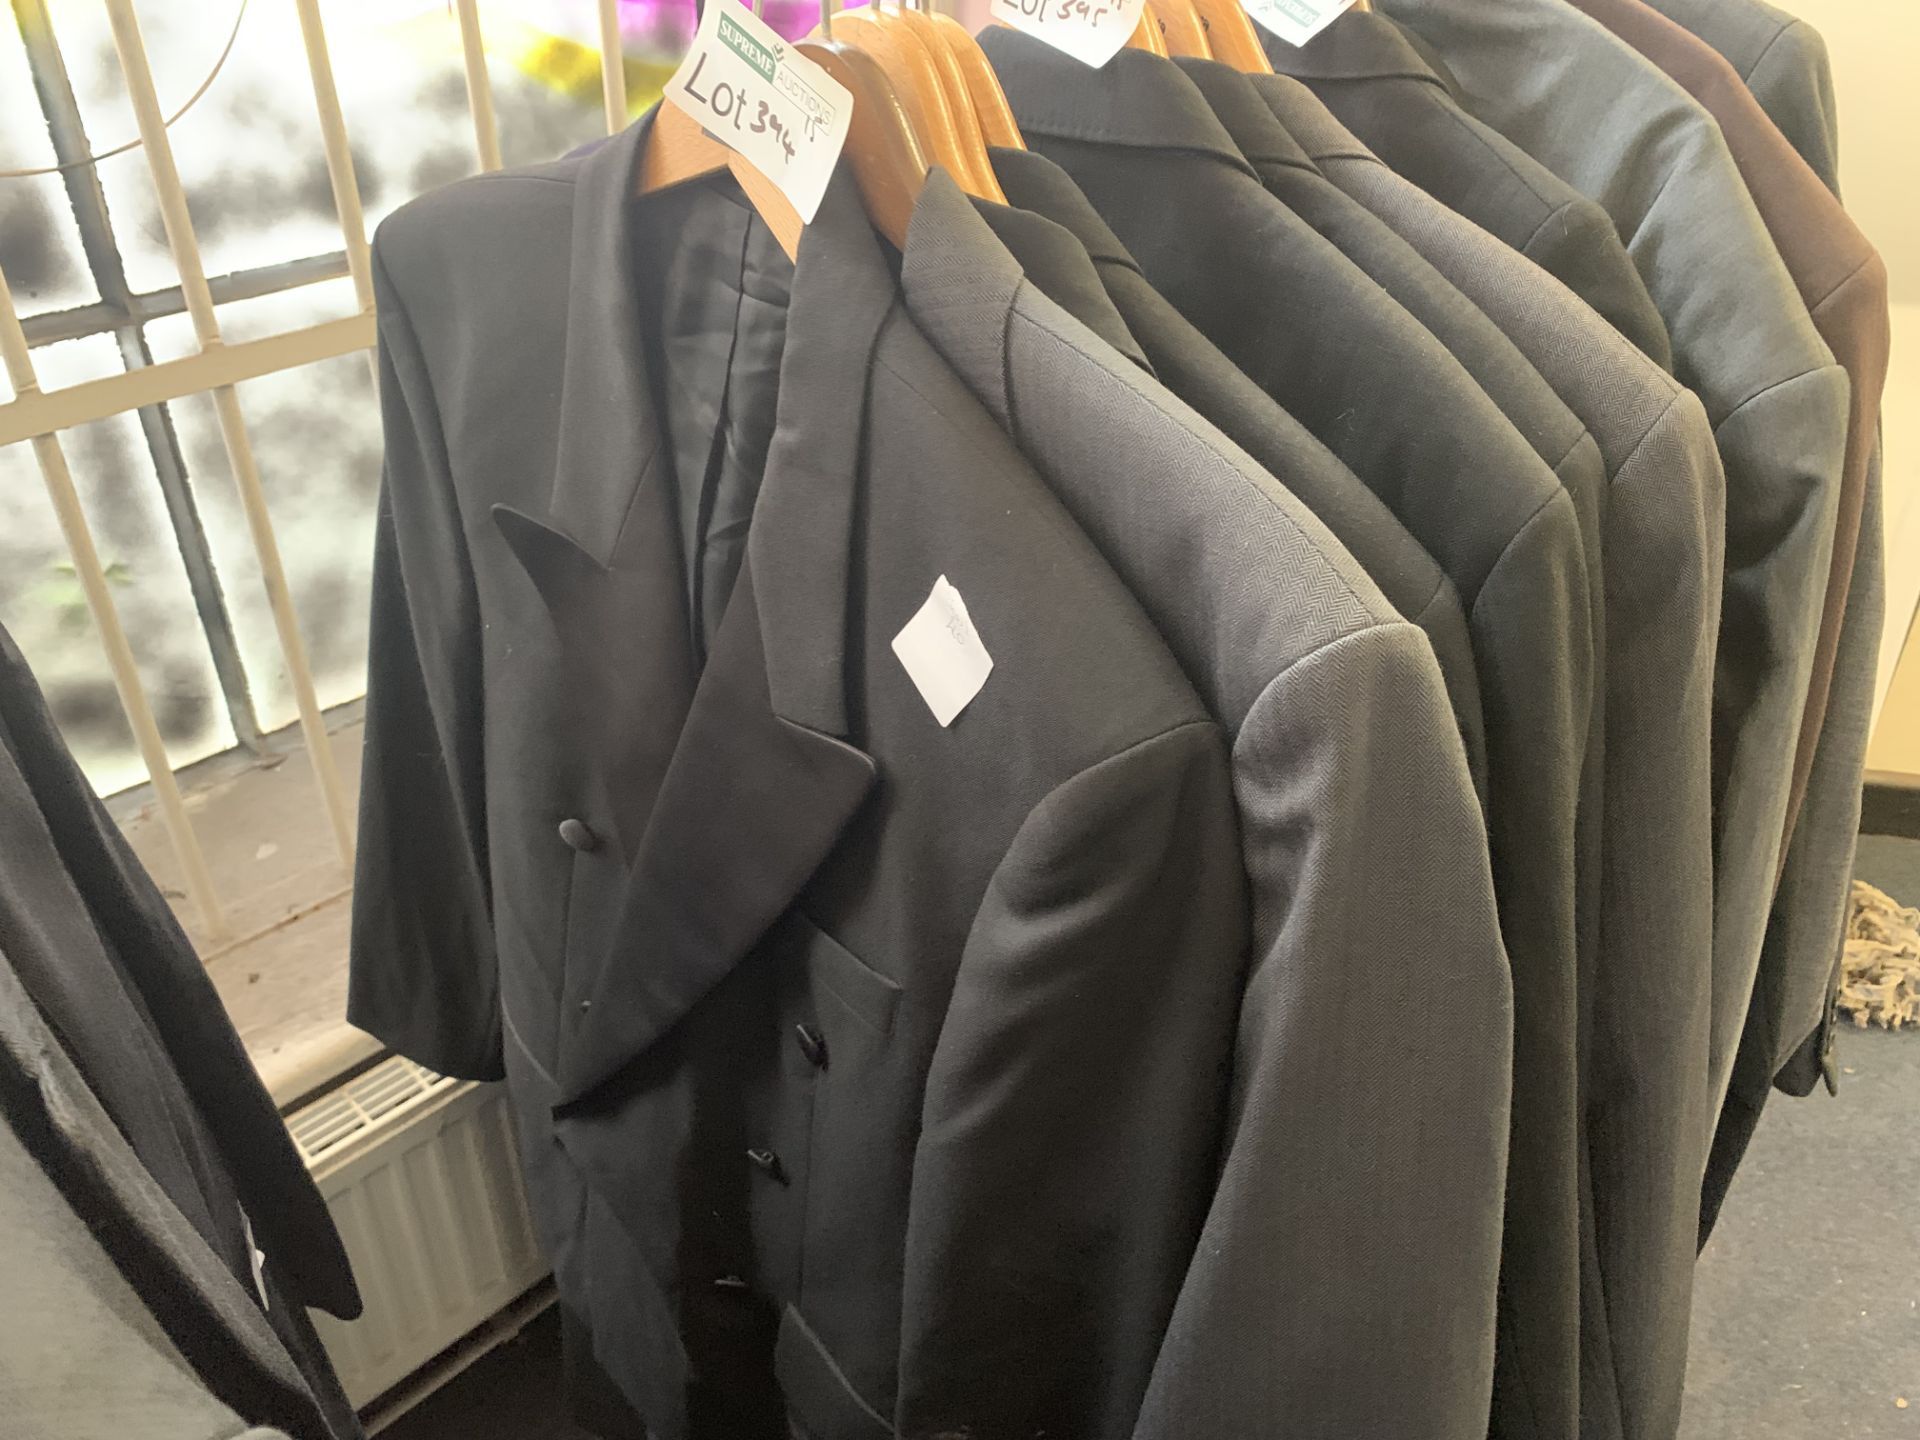 5 X BRAND NEW WEDDING SUIT JACKETS IN VARIOUS STYLES AND SIZES (394/15)